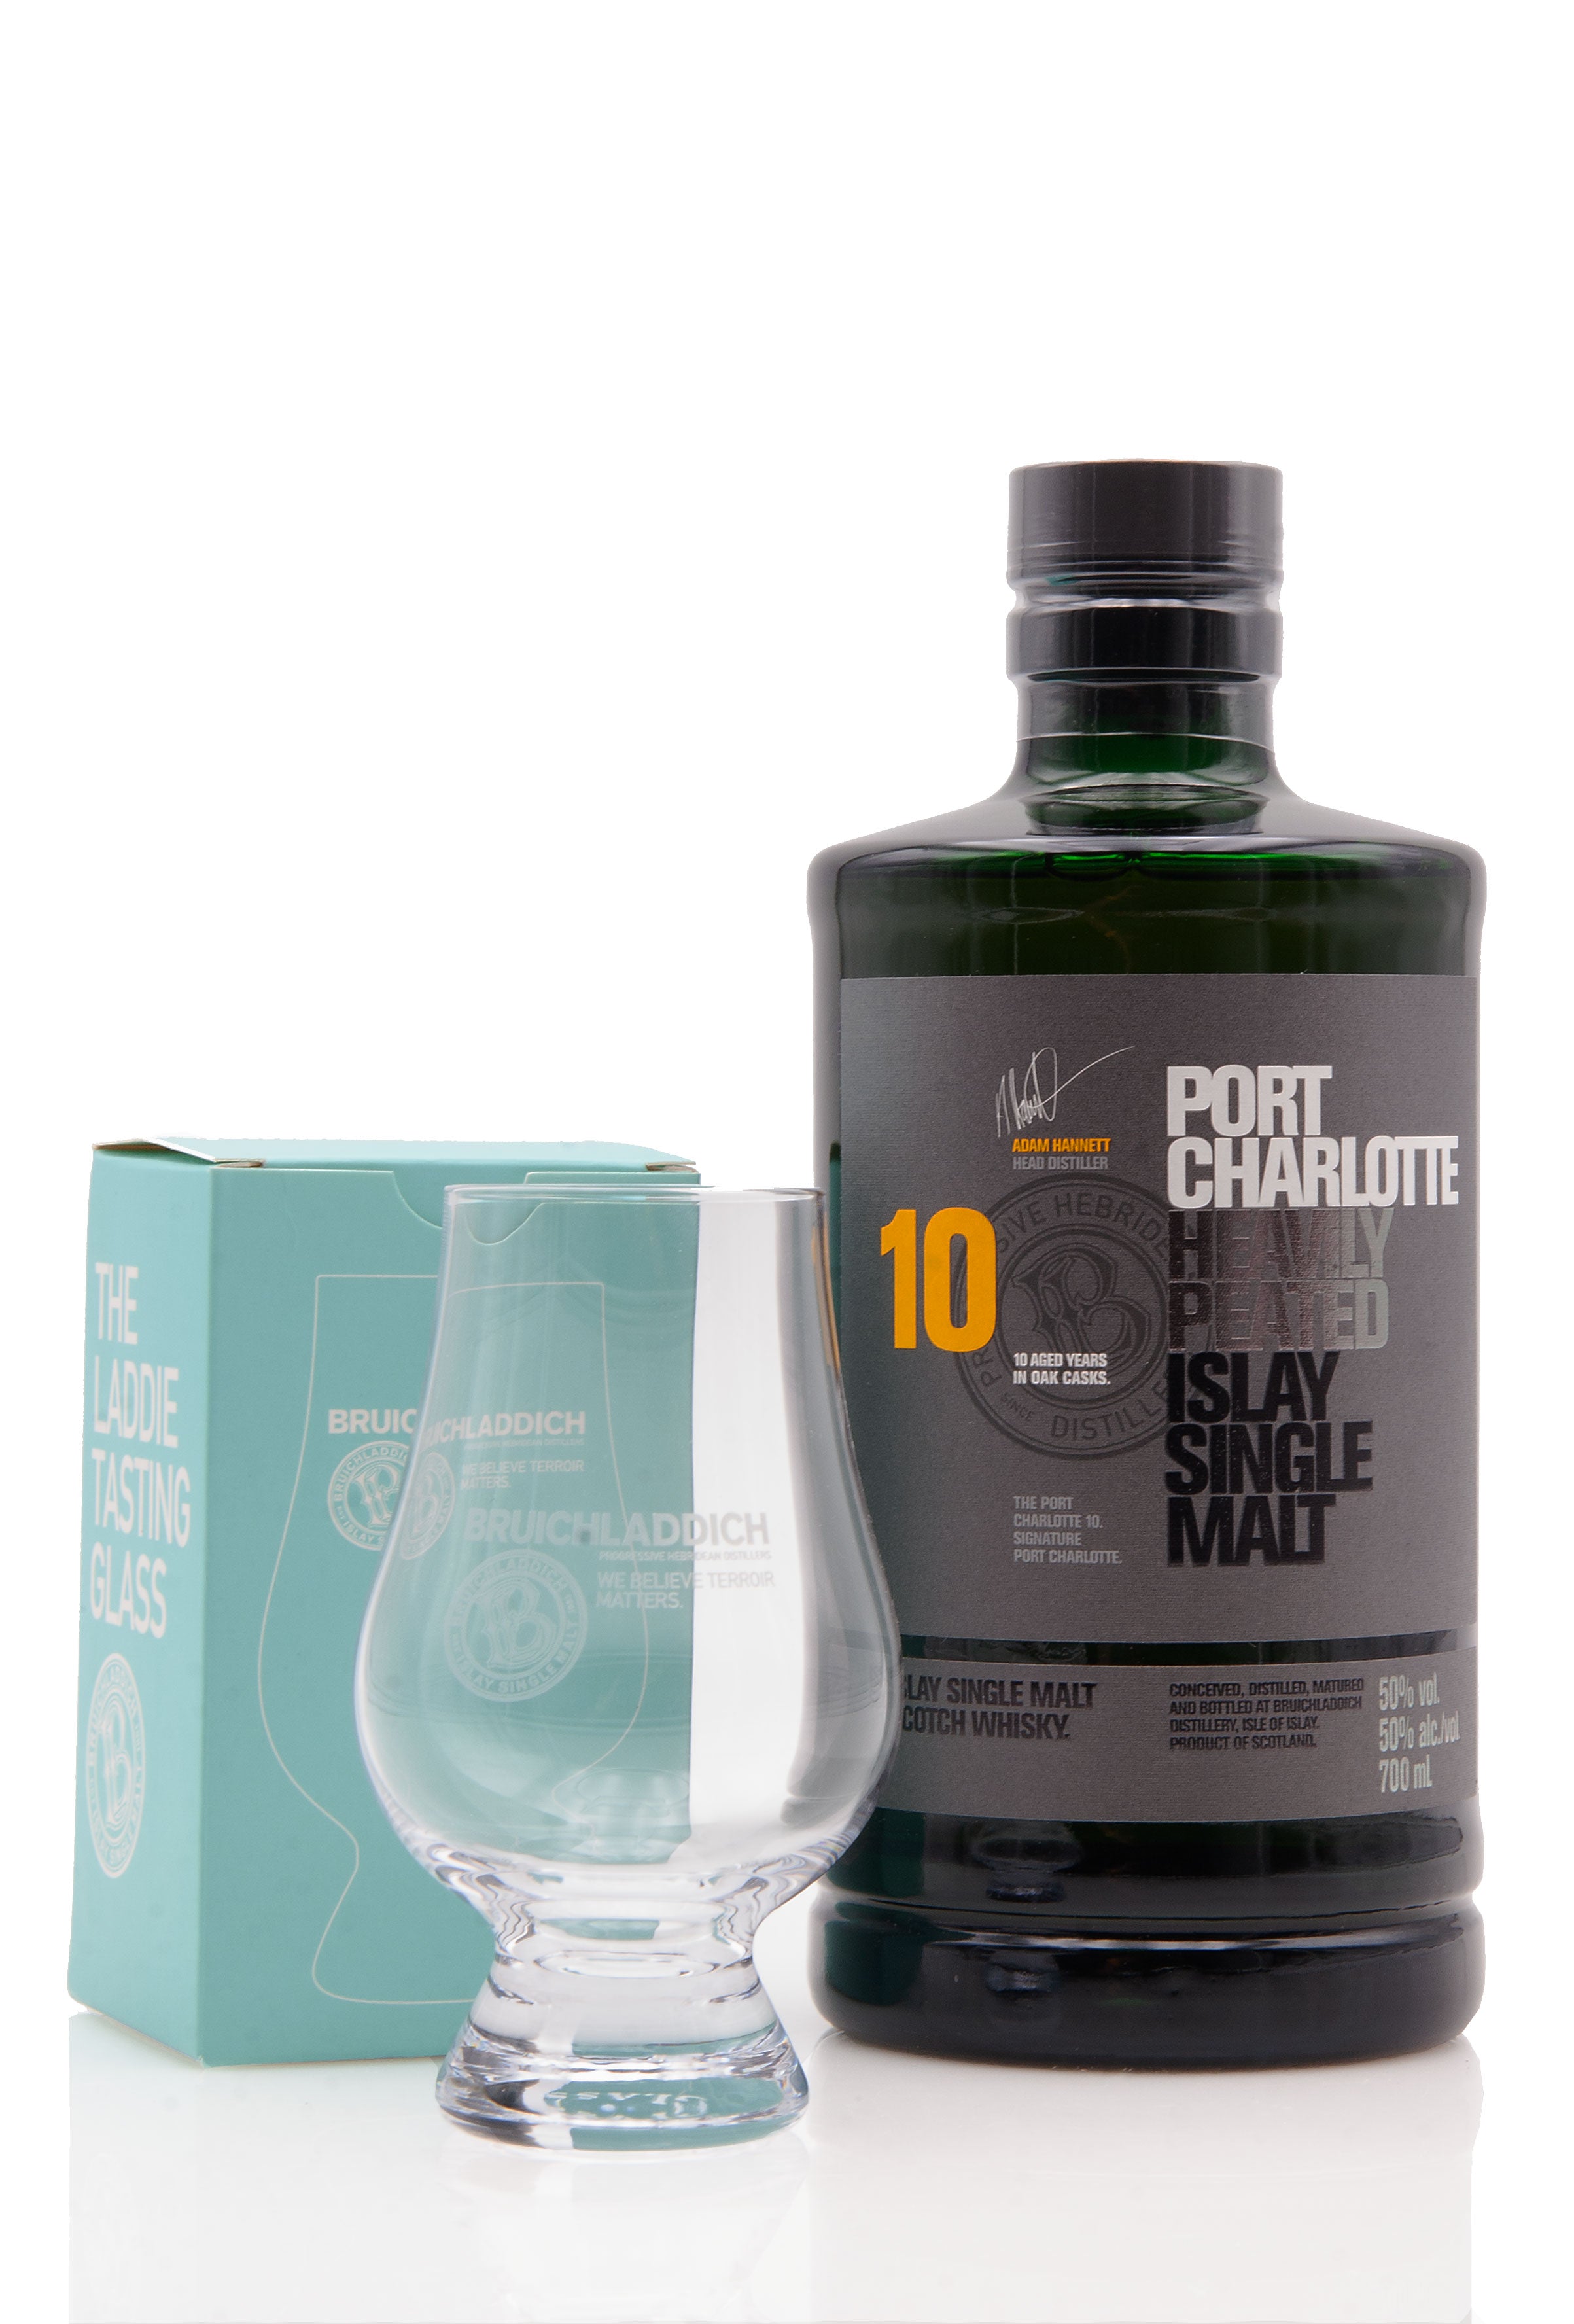 Port Charlotte 10 Years Old Heavily Peated Single Malt Scotch Whisky 70cl